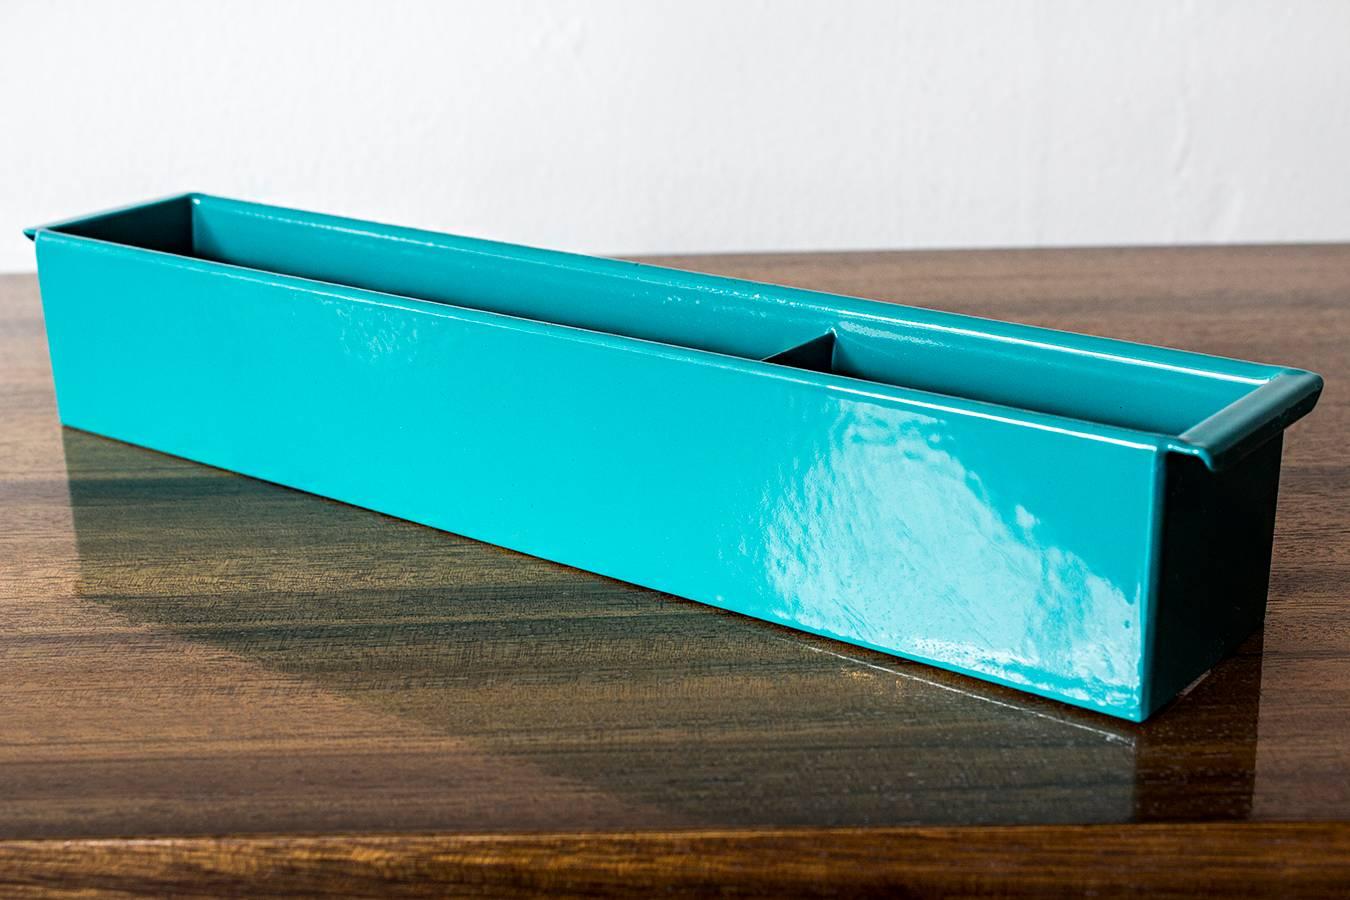 Once the insert to a classic tanker desk's utility drawer, we repurposed this neat industrial piece for use as a desktop organizer. Steel has been newly powder-coated in a pop of turquoise. Features four slots, ideal for storing coins, pens and